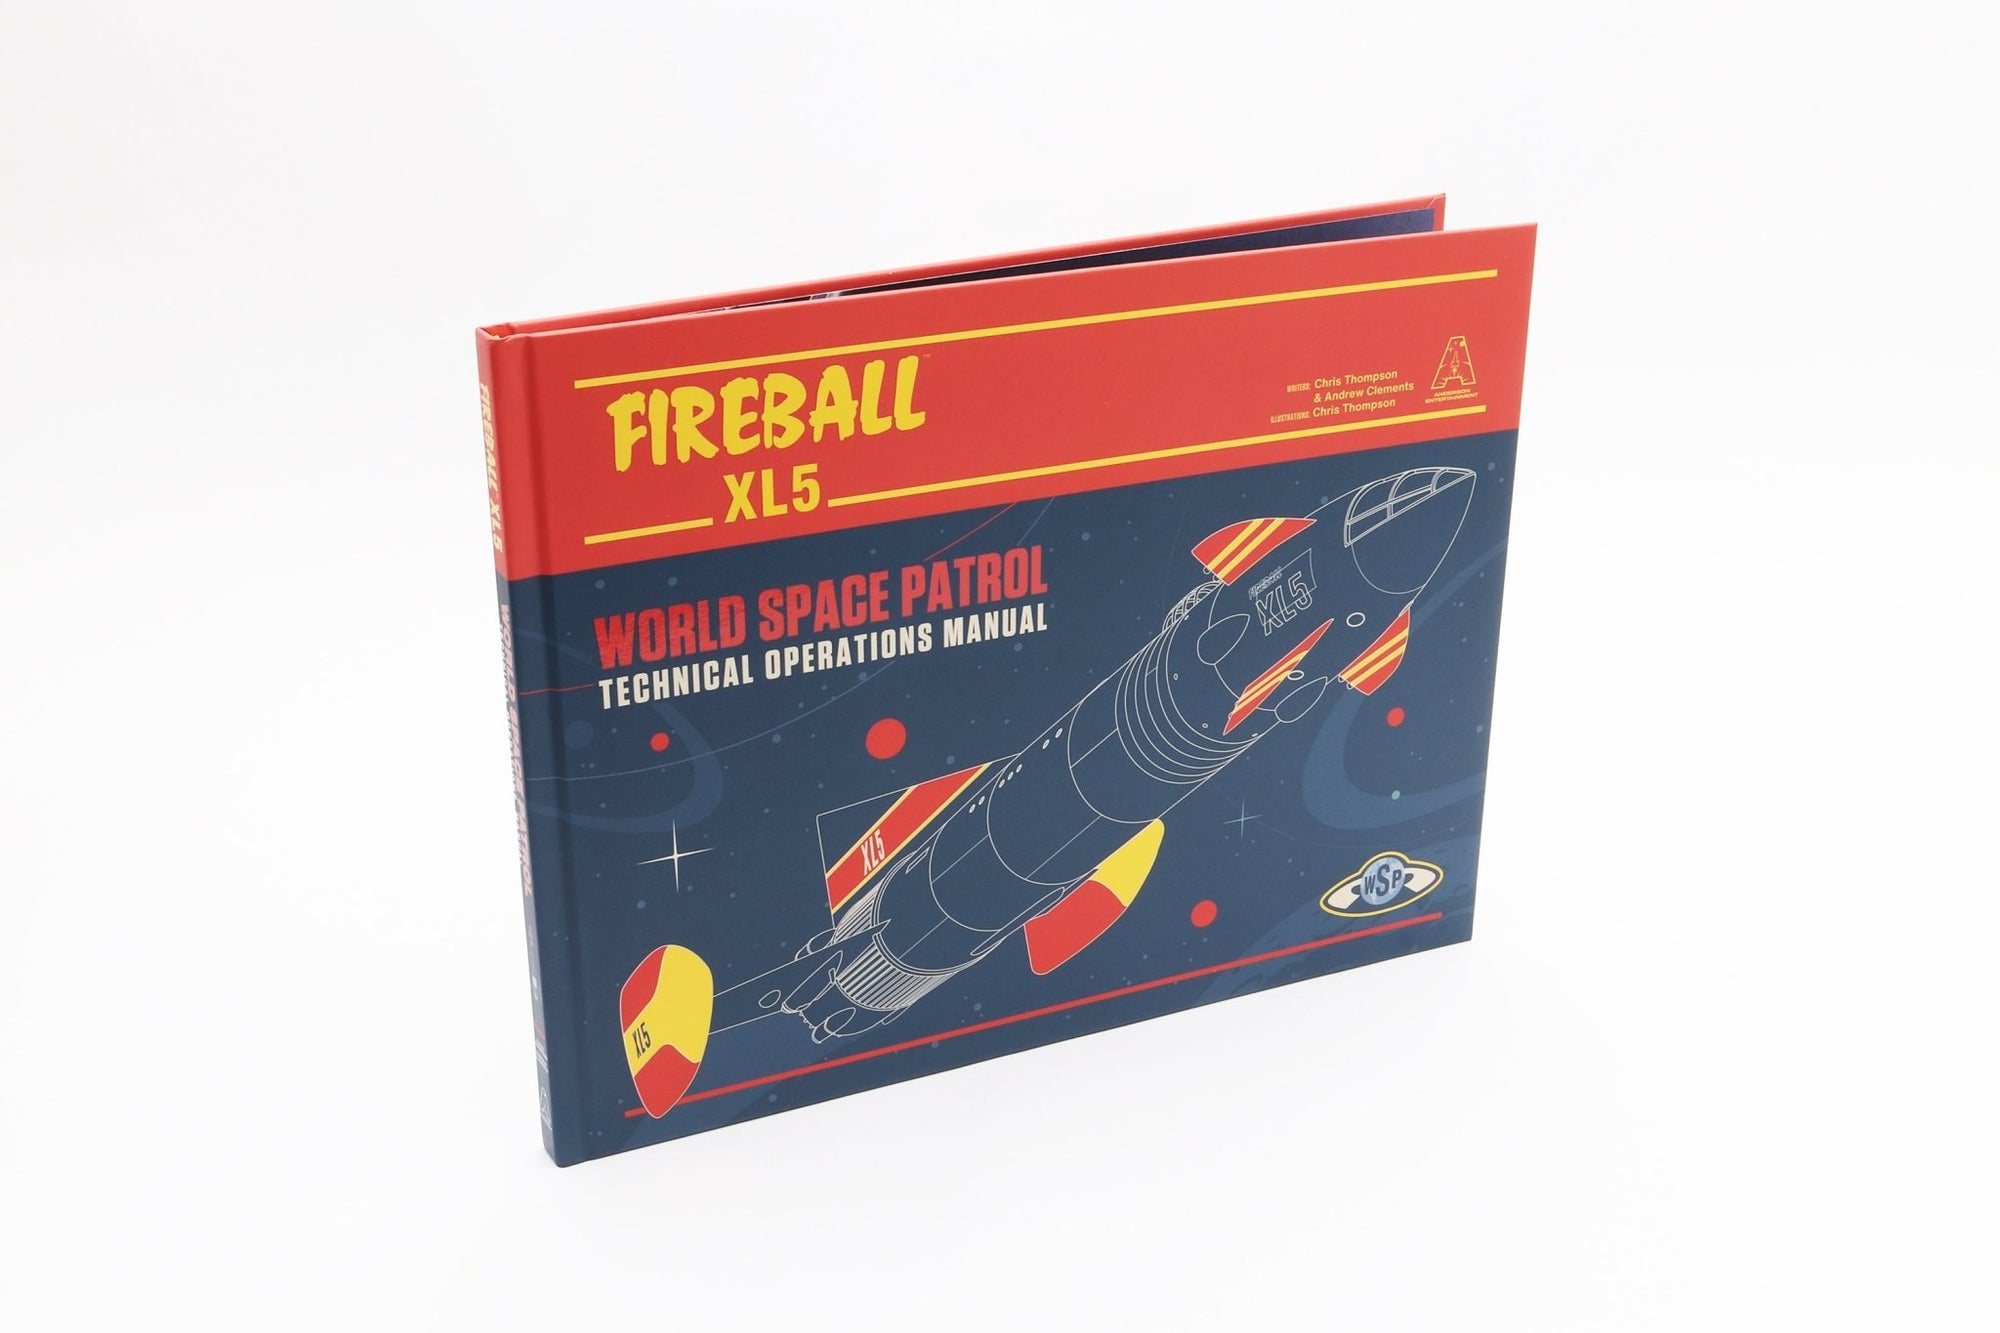 Fireball XL5 World Space Patrol Technical Operations Manual [HARDCOVER BOOK] - The Gerry Anderson Store